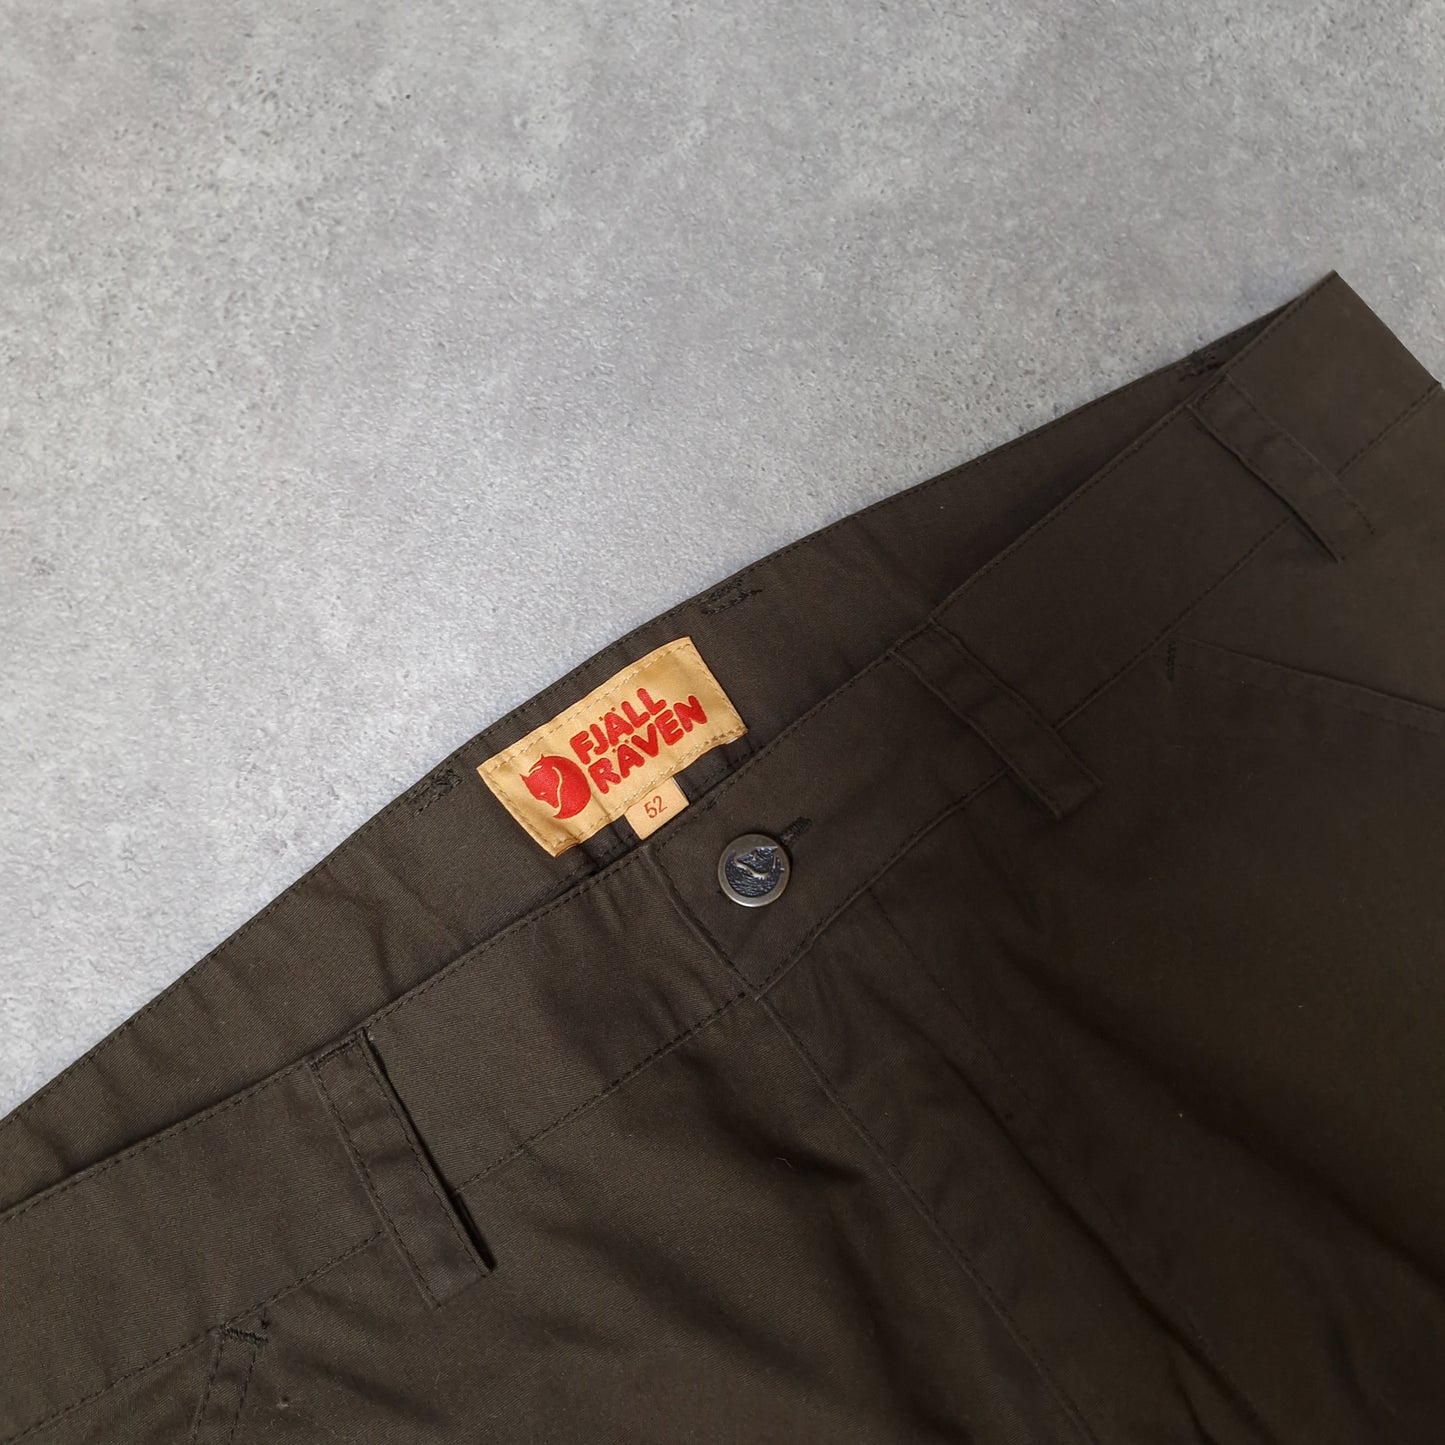 Fjallraven G-100 trousers in brown - 36"